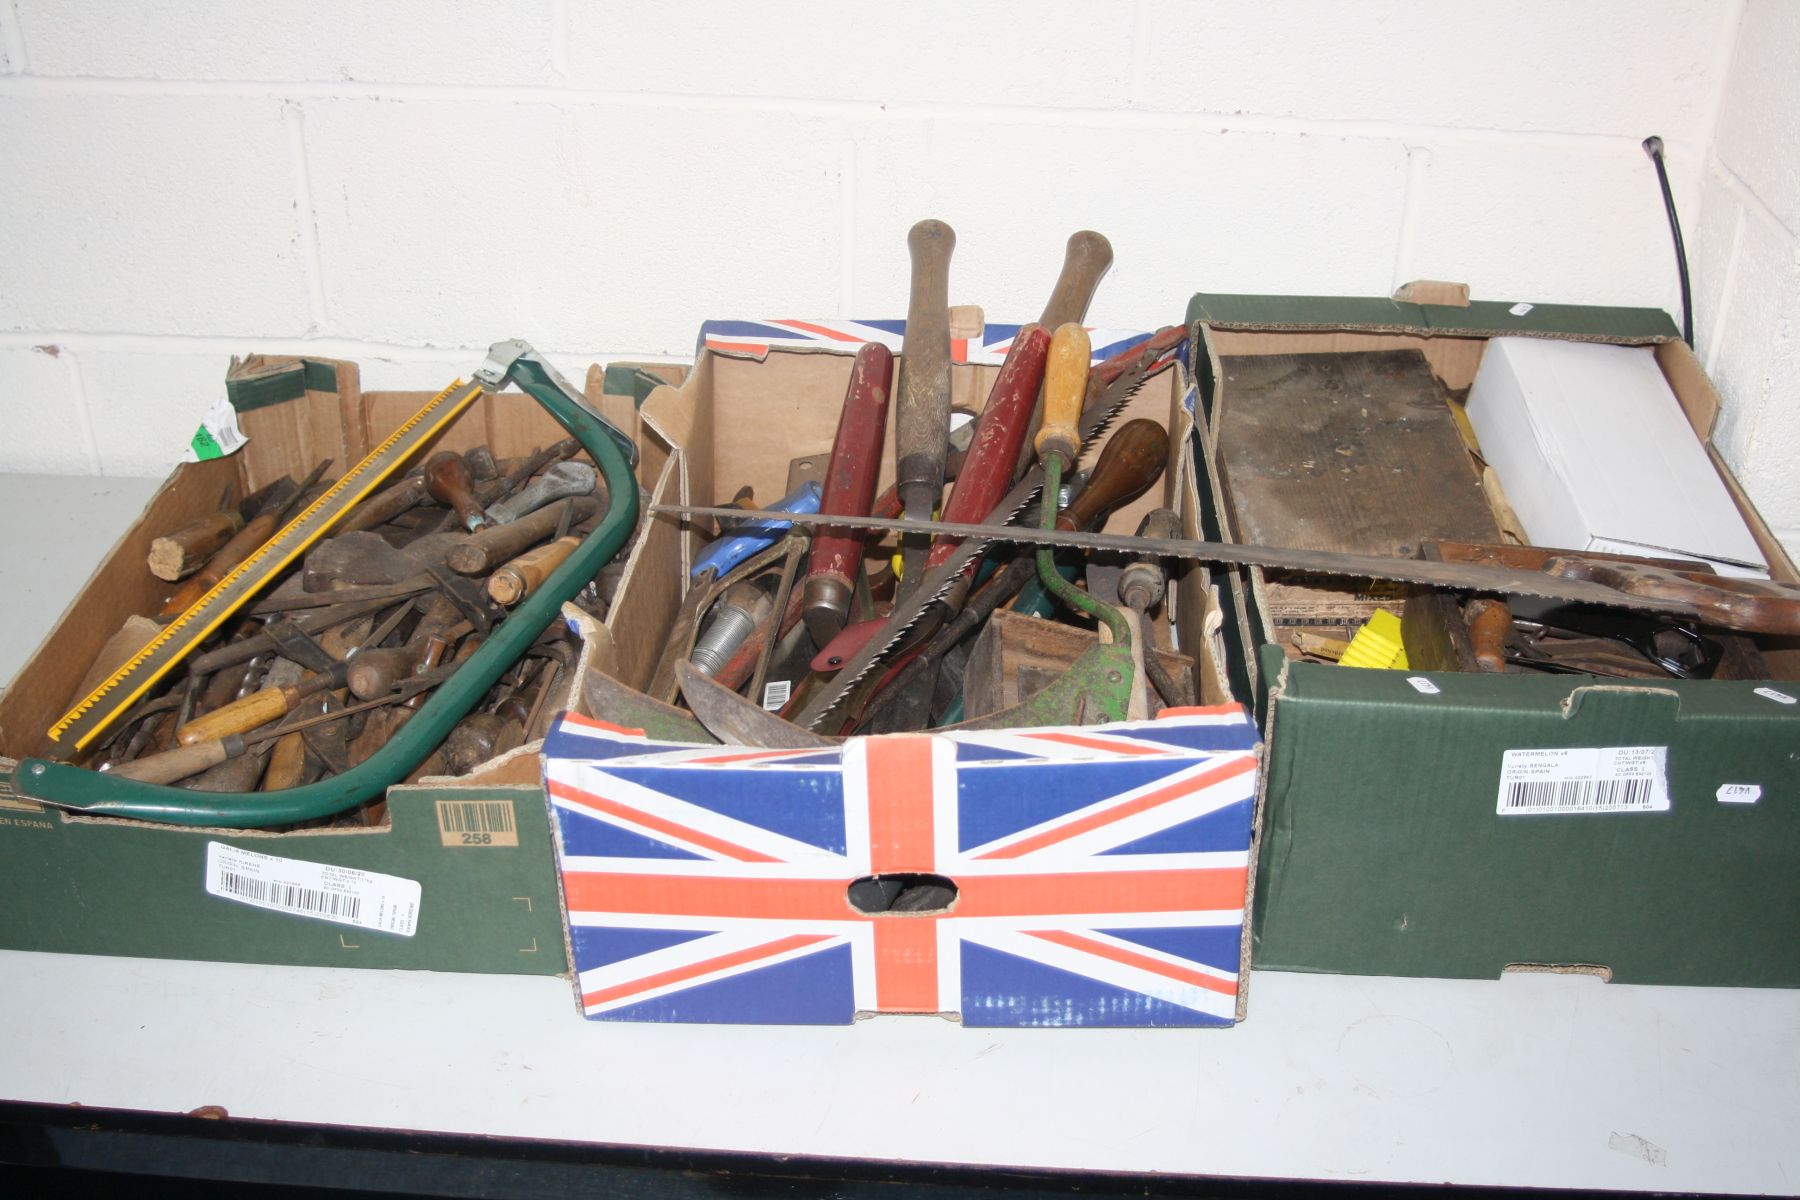 FIVE BOXES OF VARIOUS HAND TOOLS, to include planes, saws, hand sythes, files, chizels, hammers,